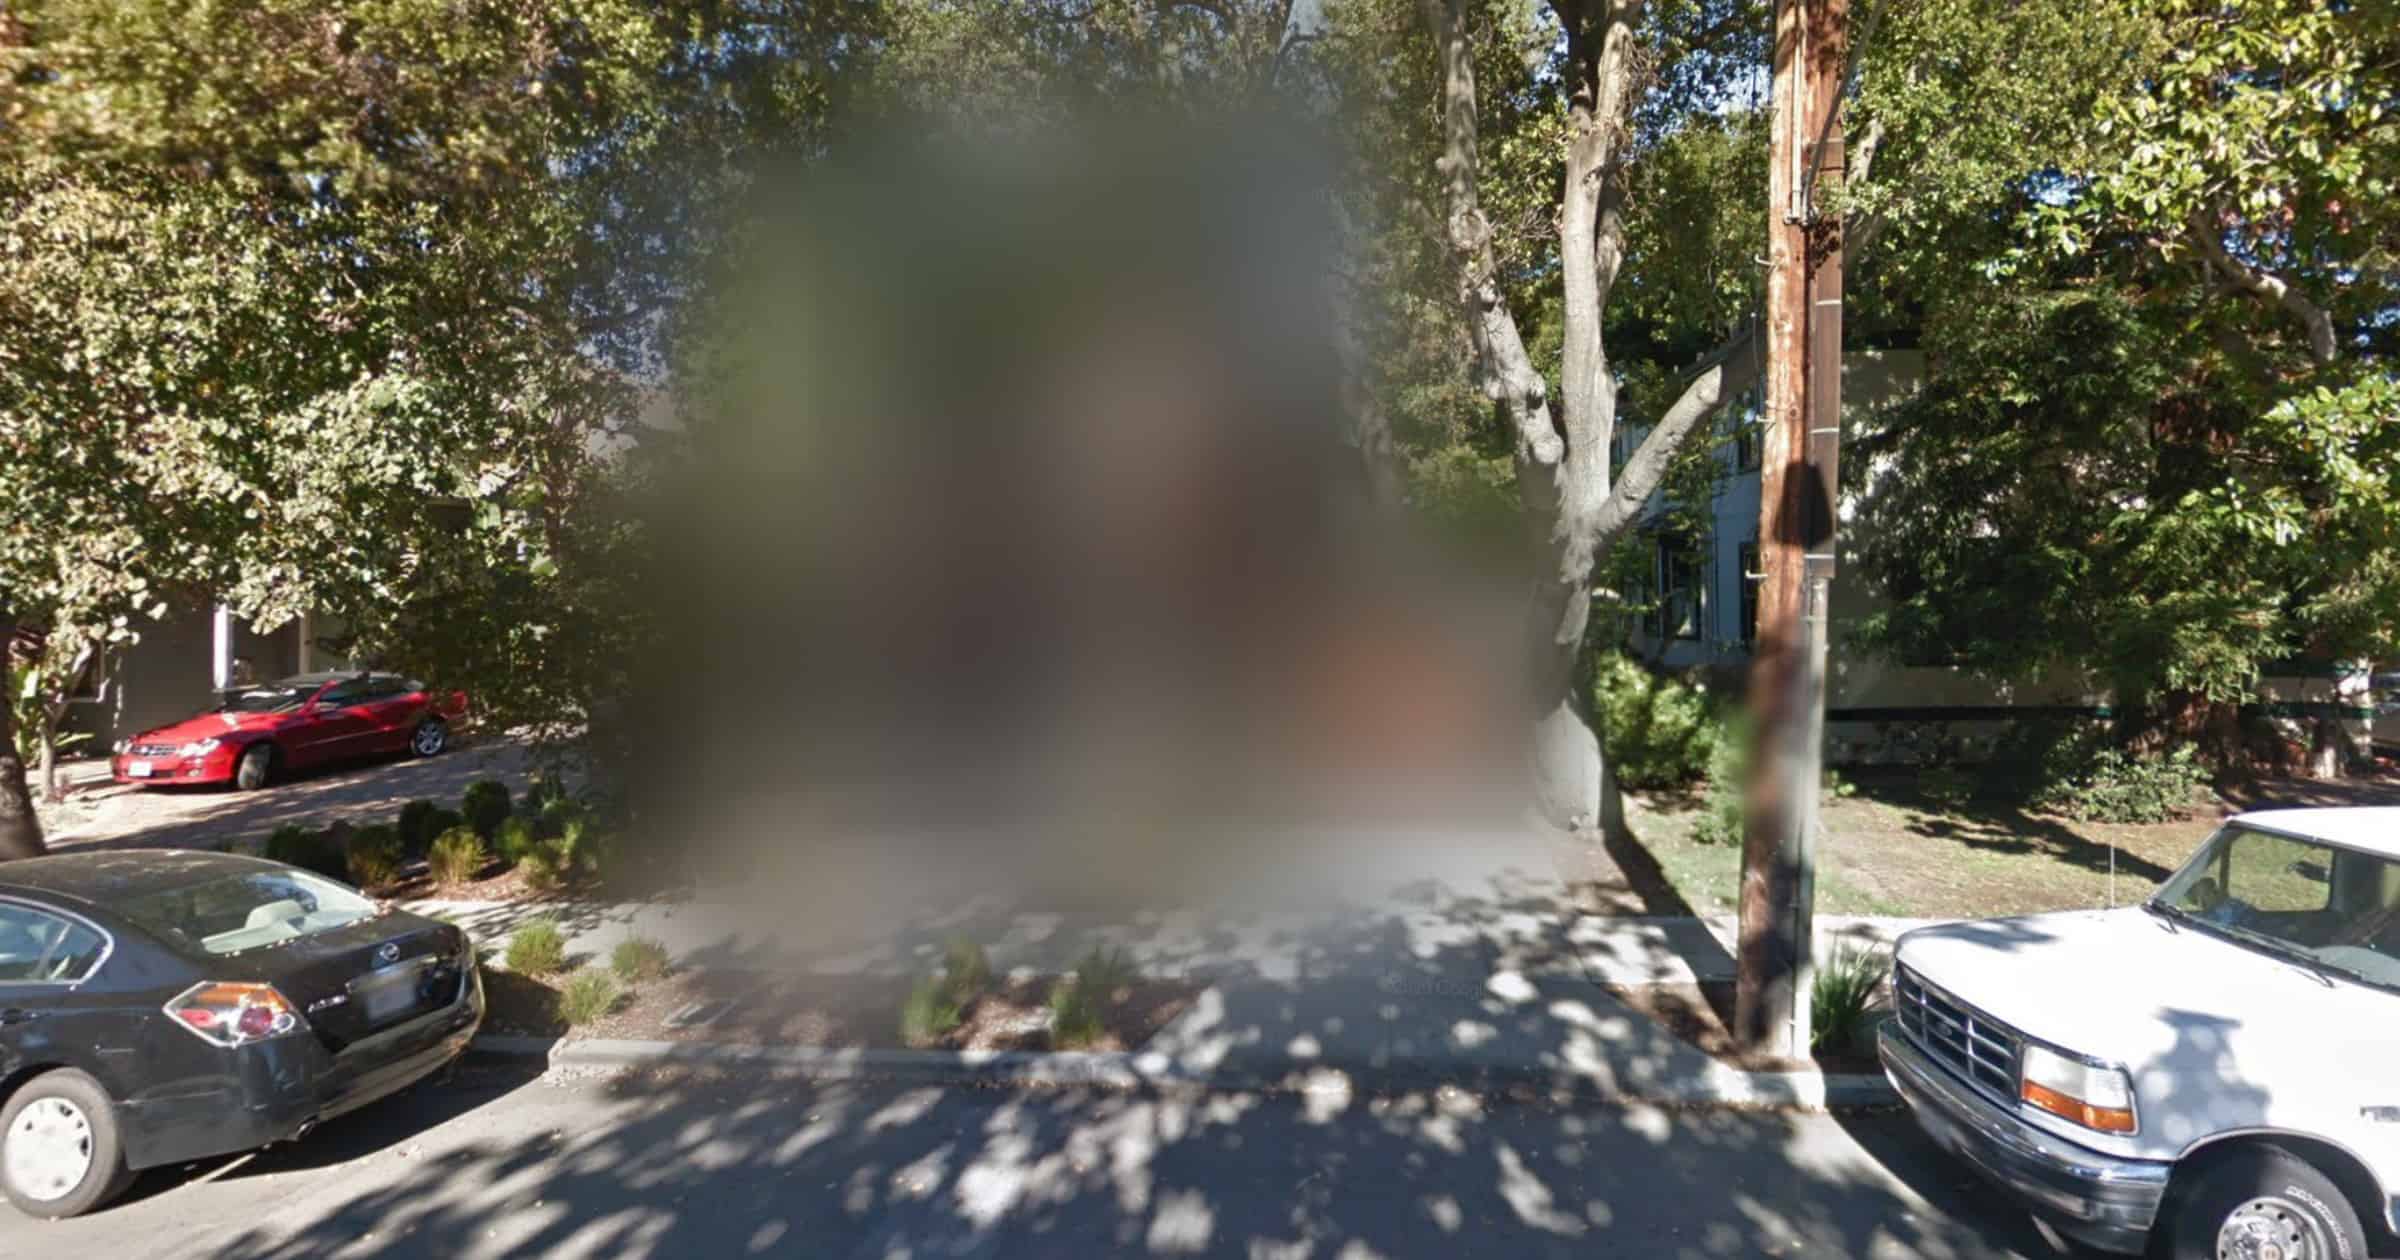 Google and Apple Maps Blur Tim Cook’s Home After Stalker Fears